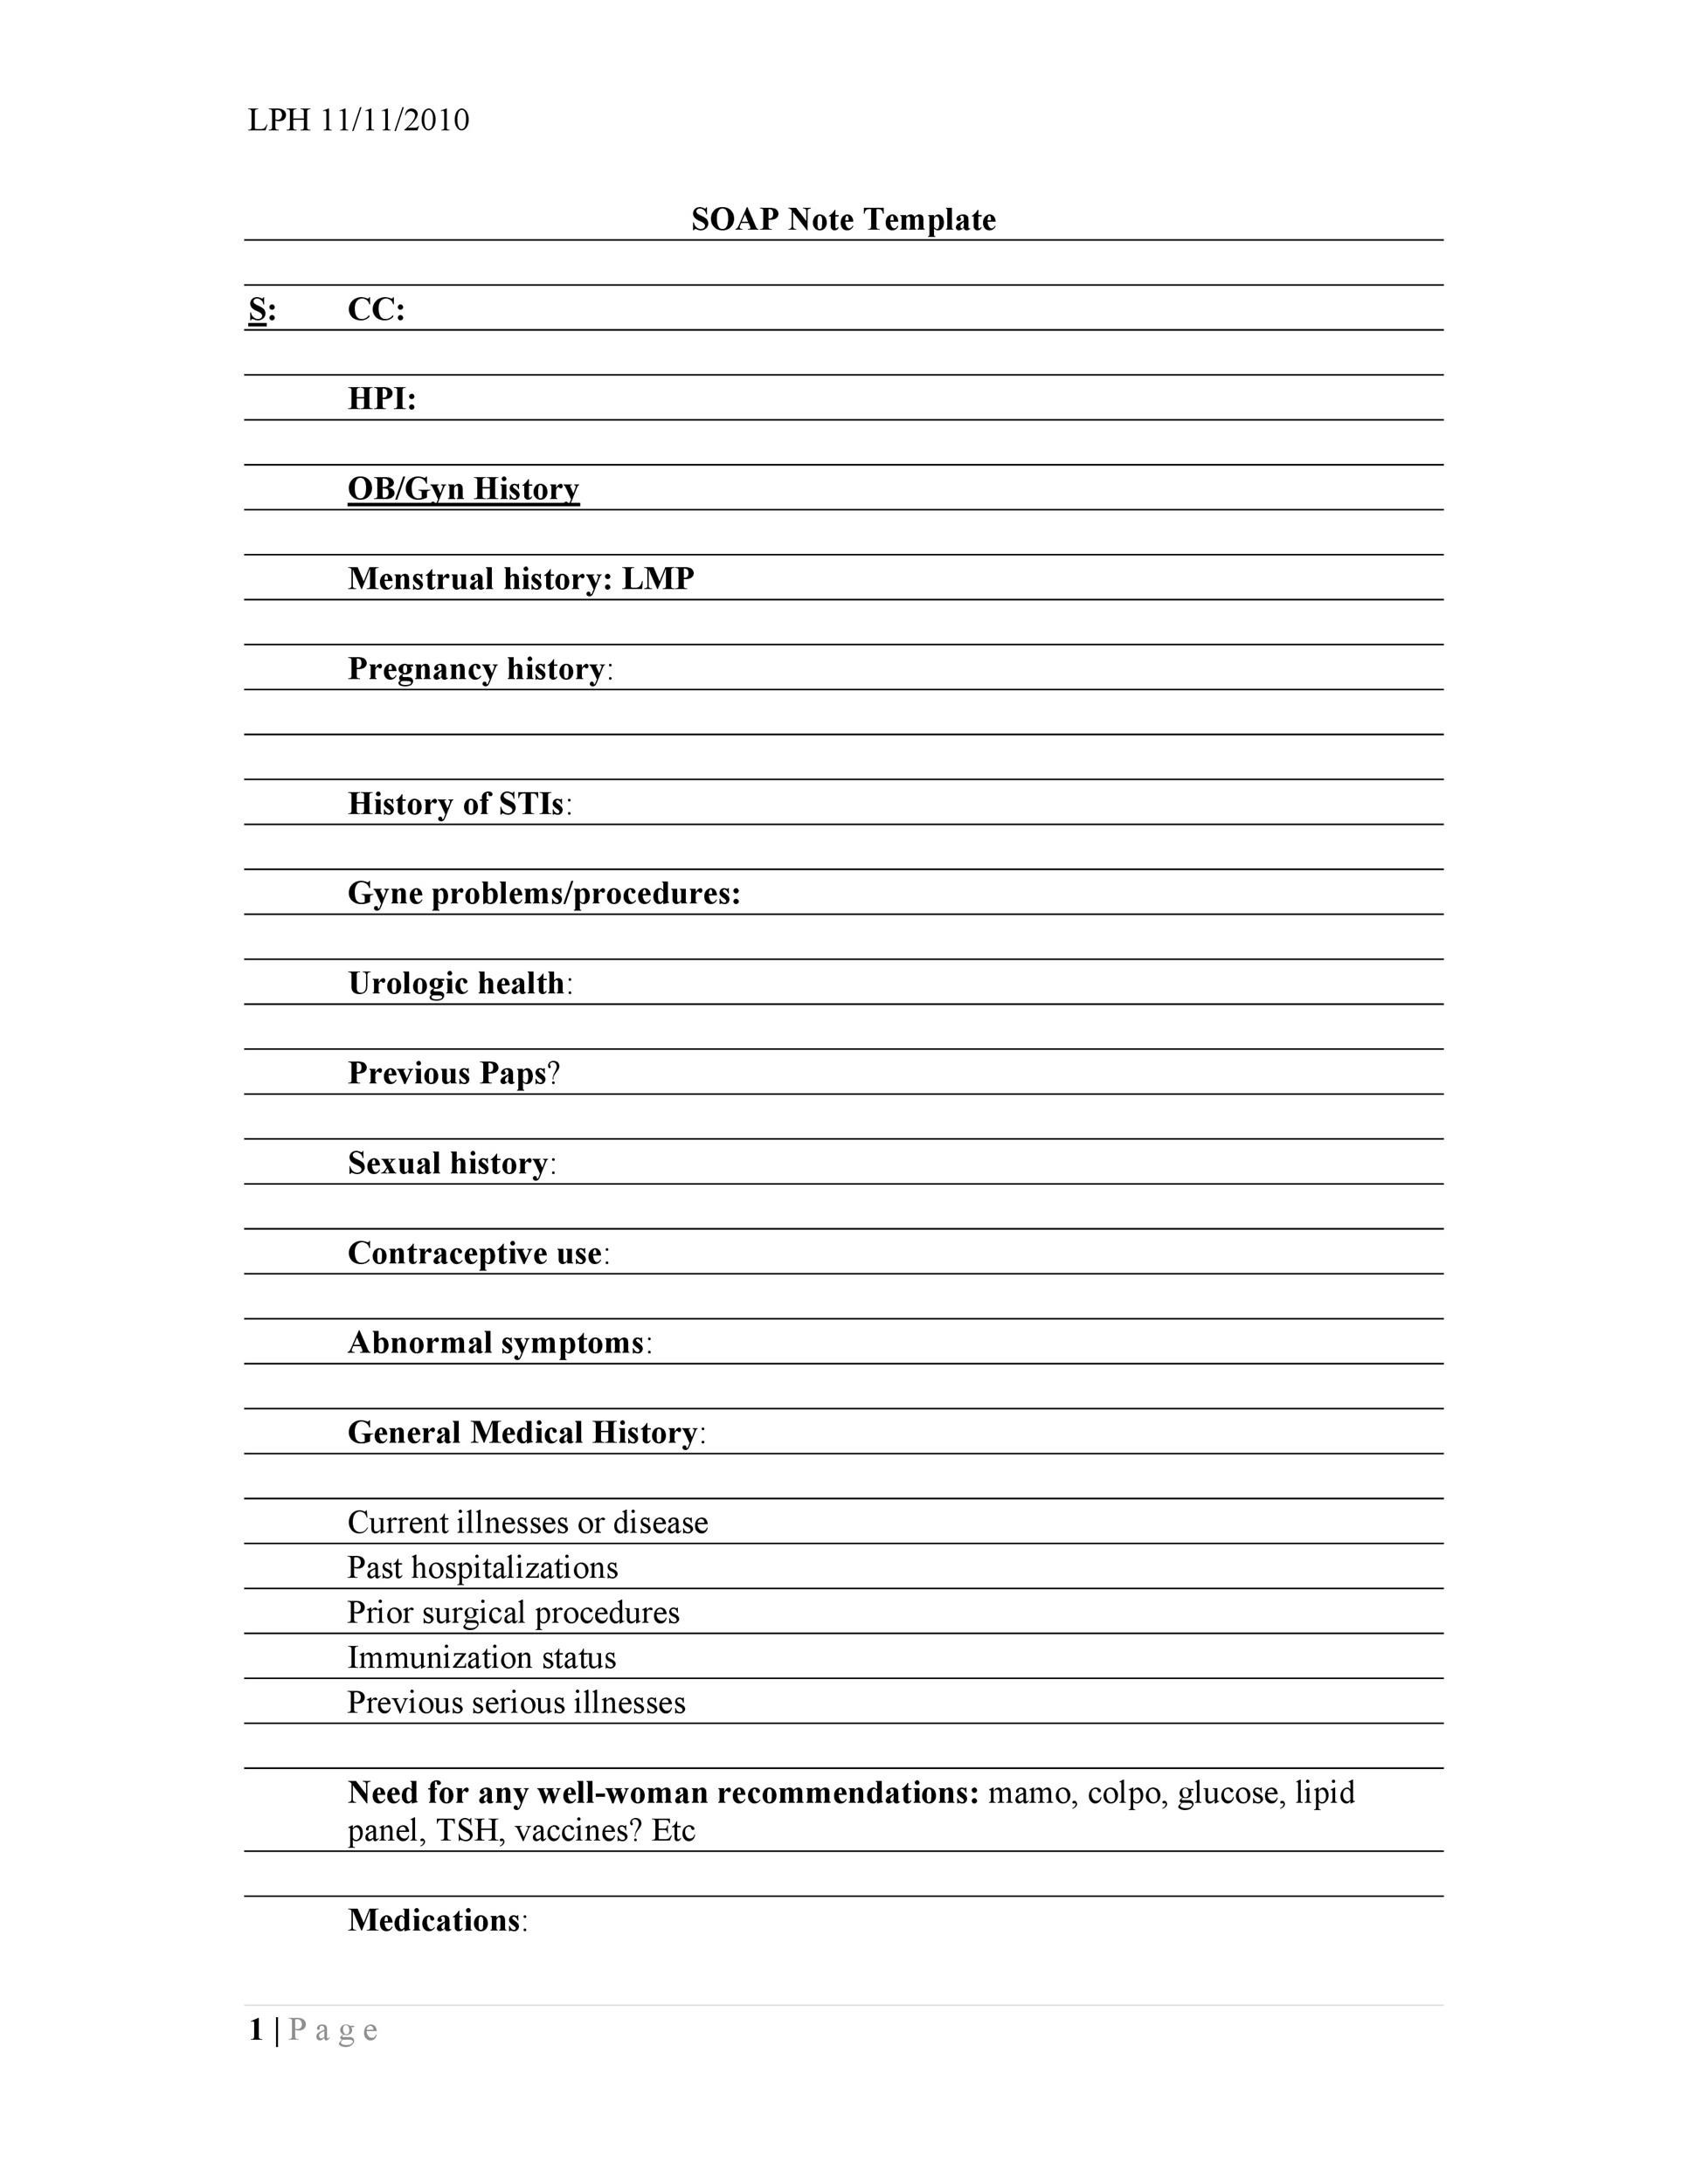 Free Soap Note Template 12